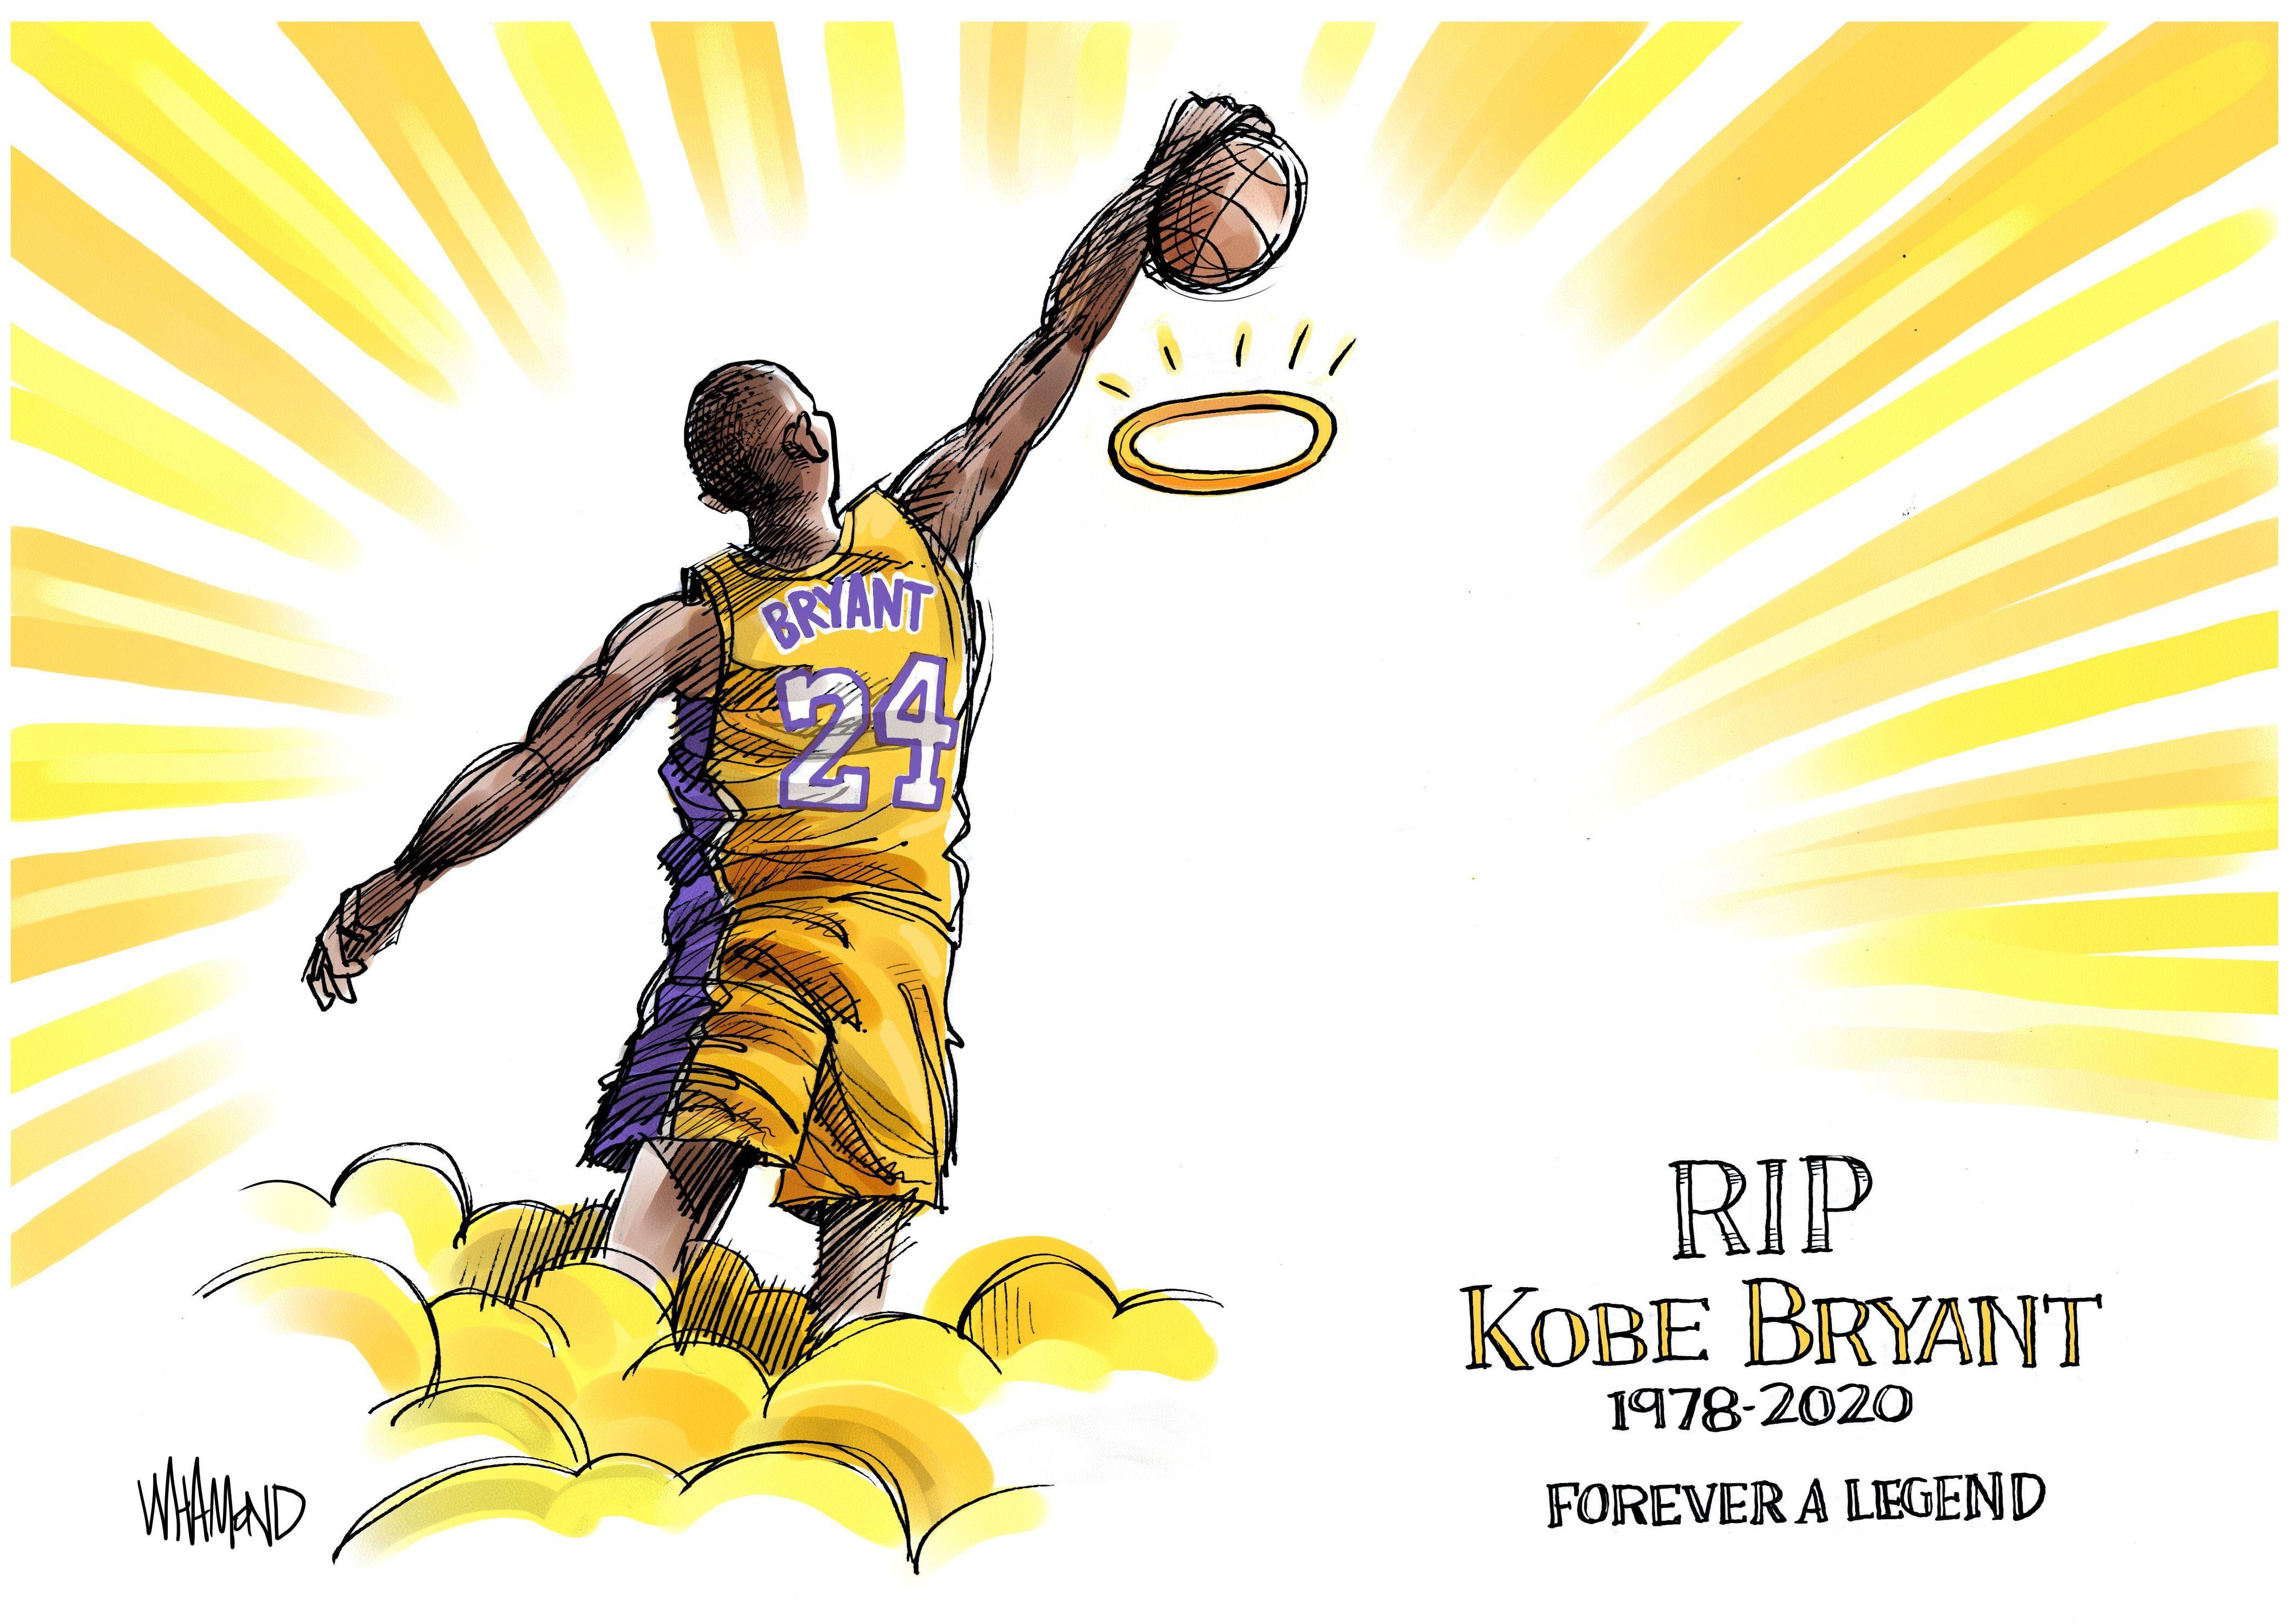 Cartoons: Kobe Bryant's death, memorialized by artists around the worl...